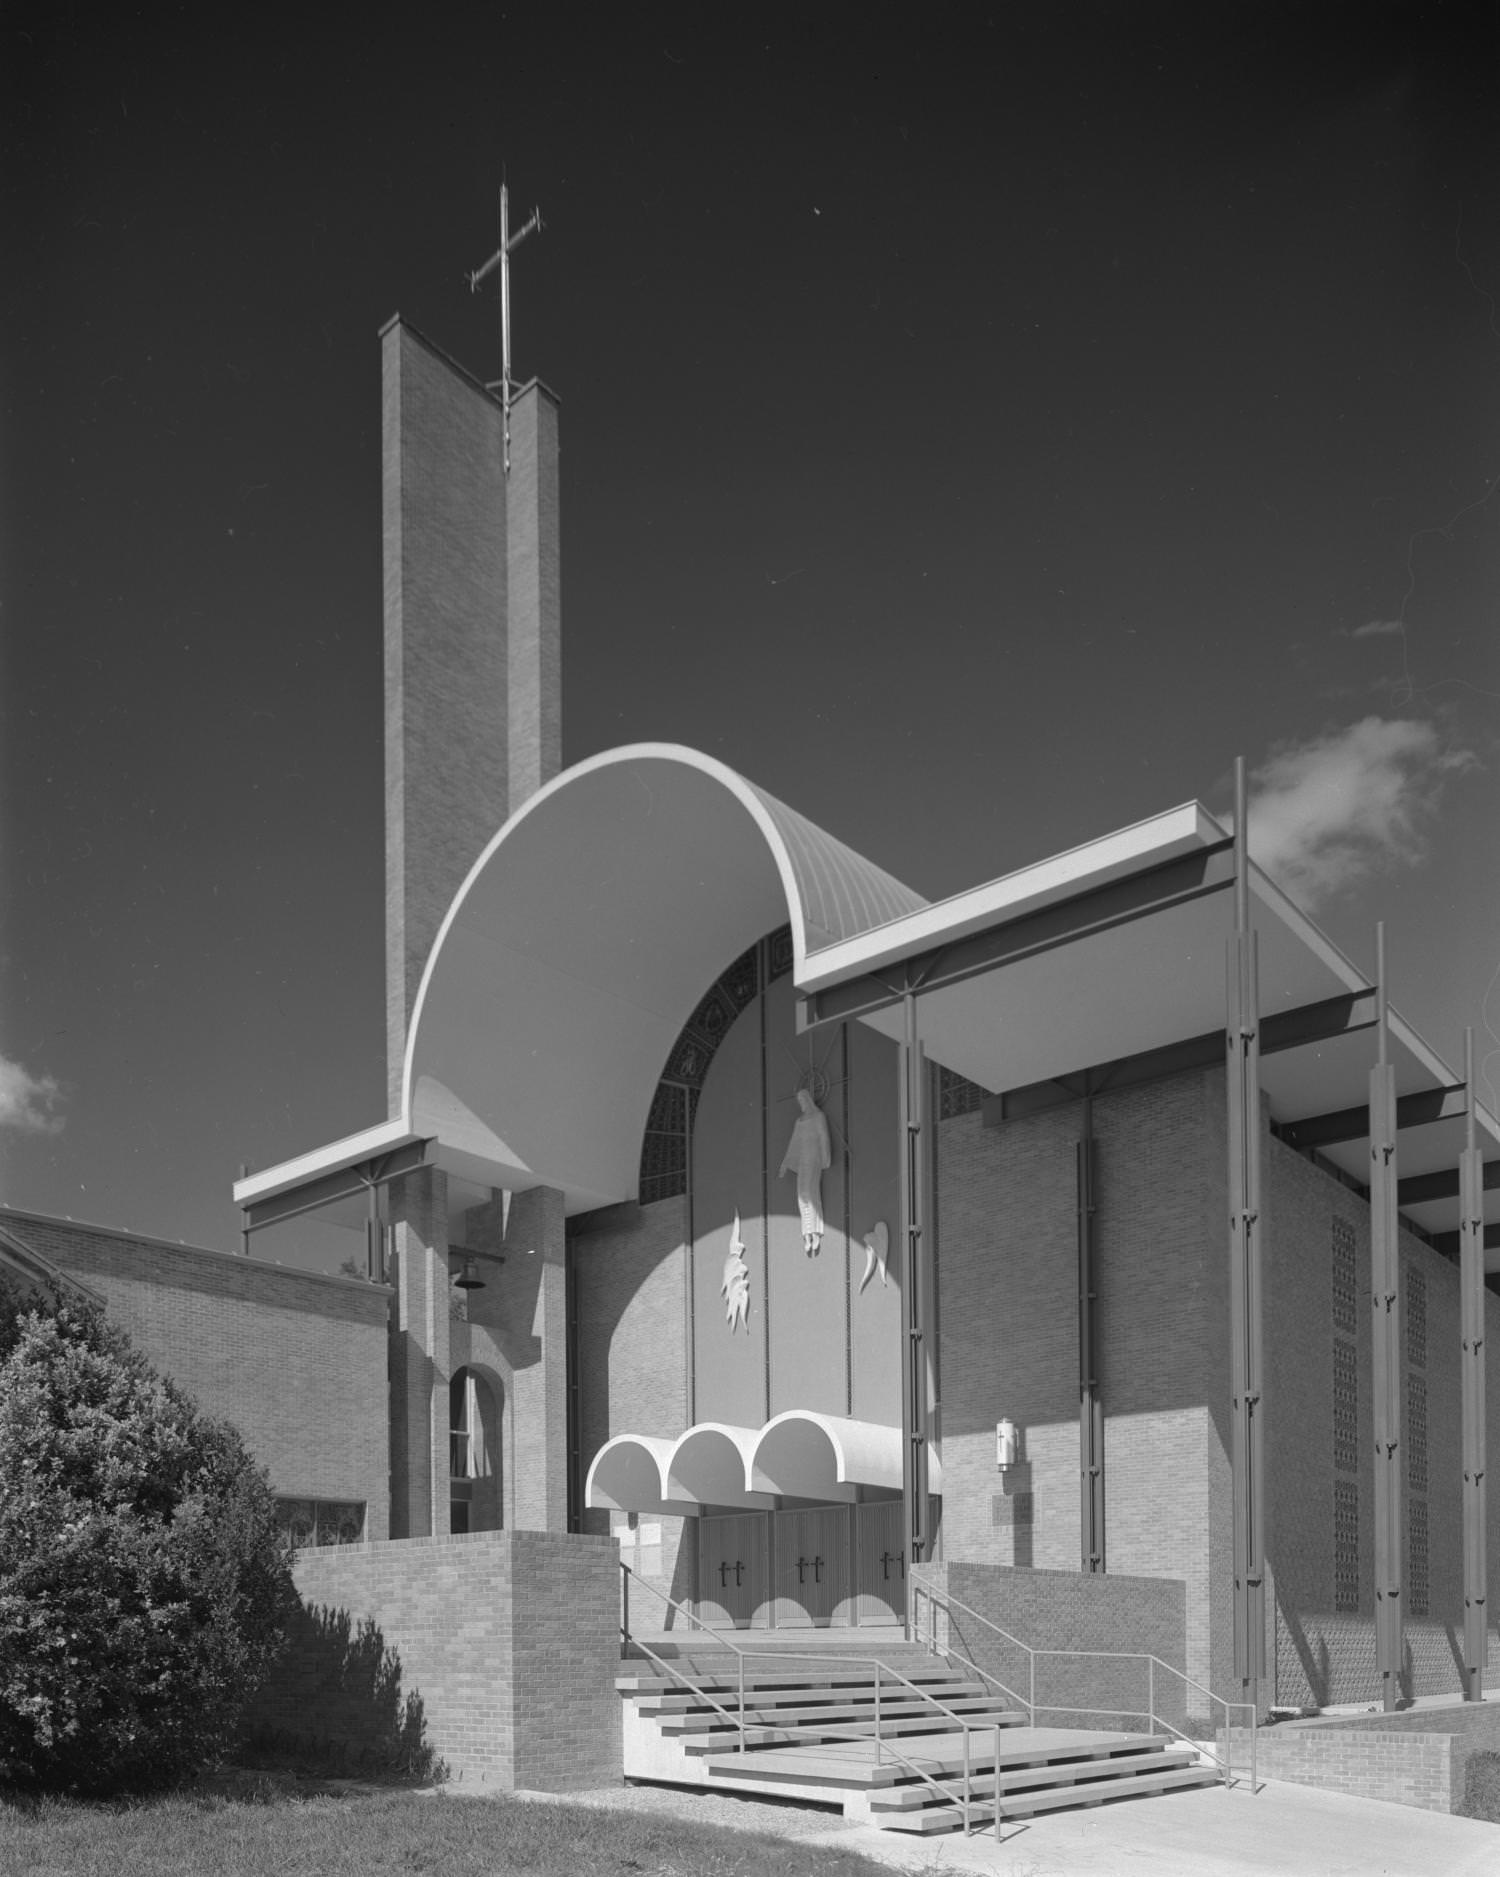 The exterior St. Martin's Lutheran Church that features and arched, geometric roof line a wide set of steps seen in the foreground, 1960